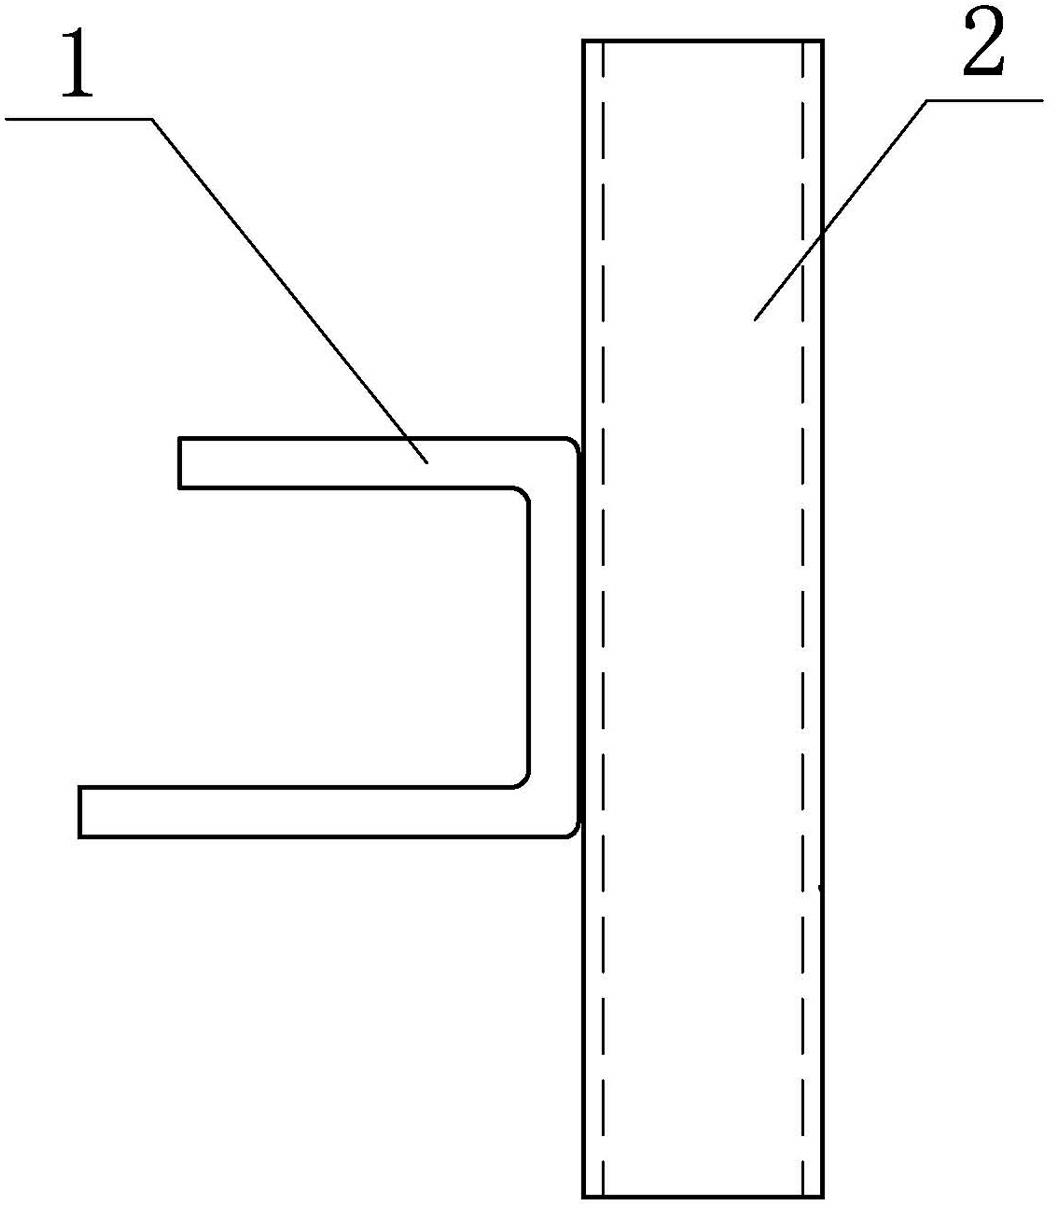 U-shaped force-bearing seat and construction method of steel beam-reinforced concrete floor slab structure